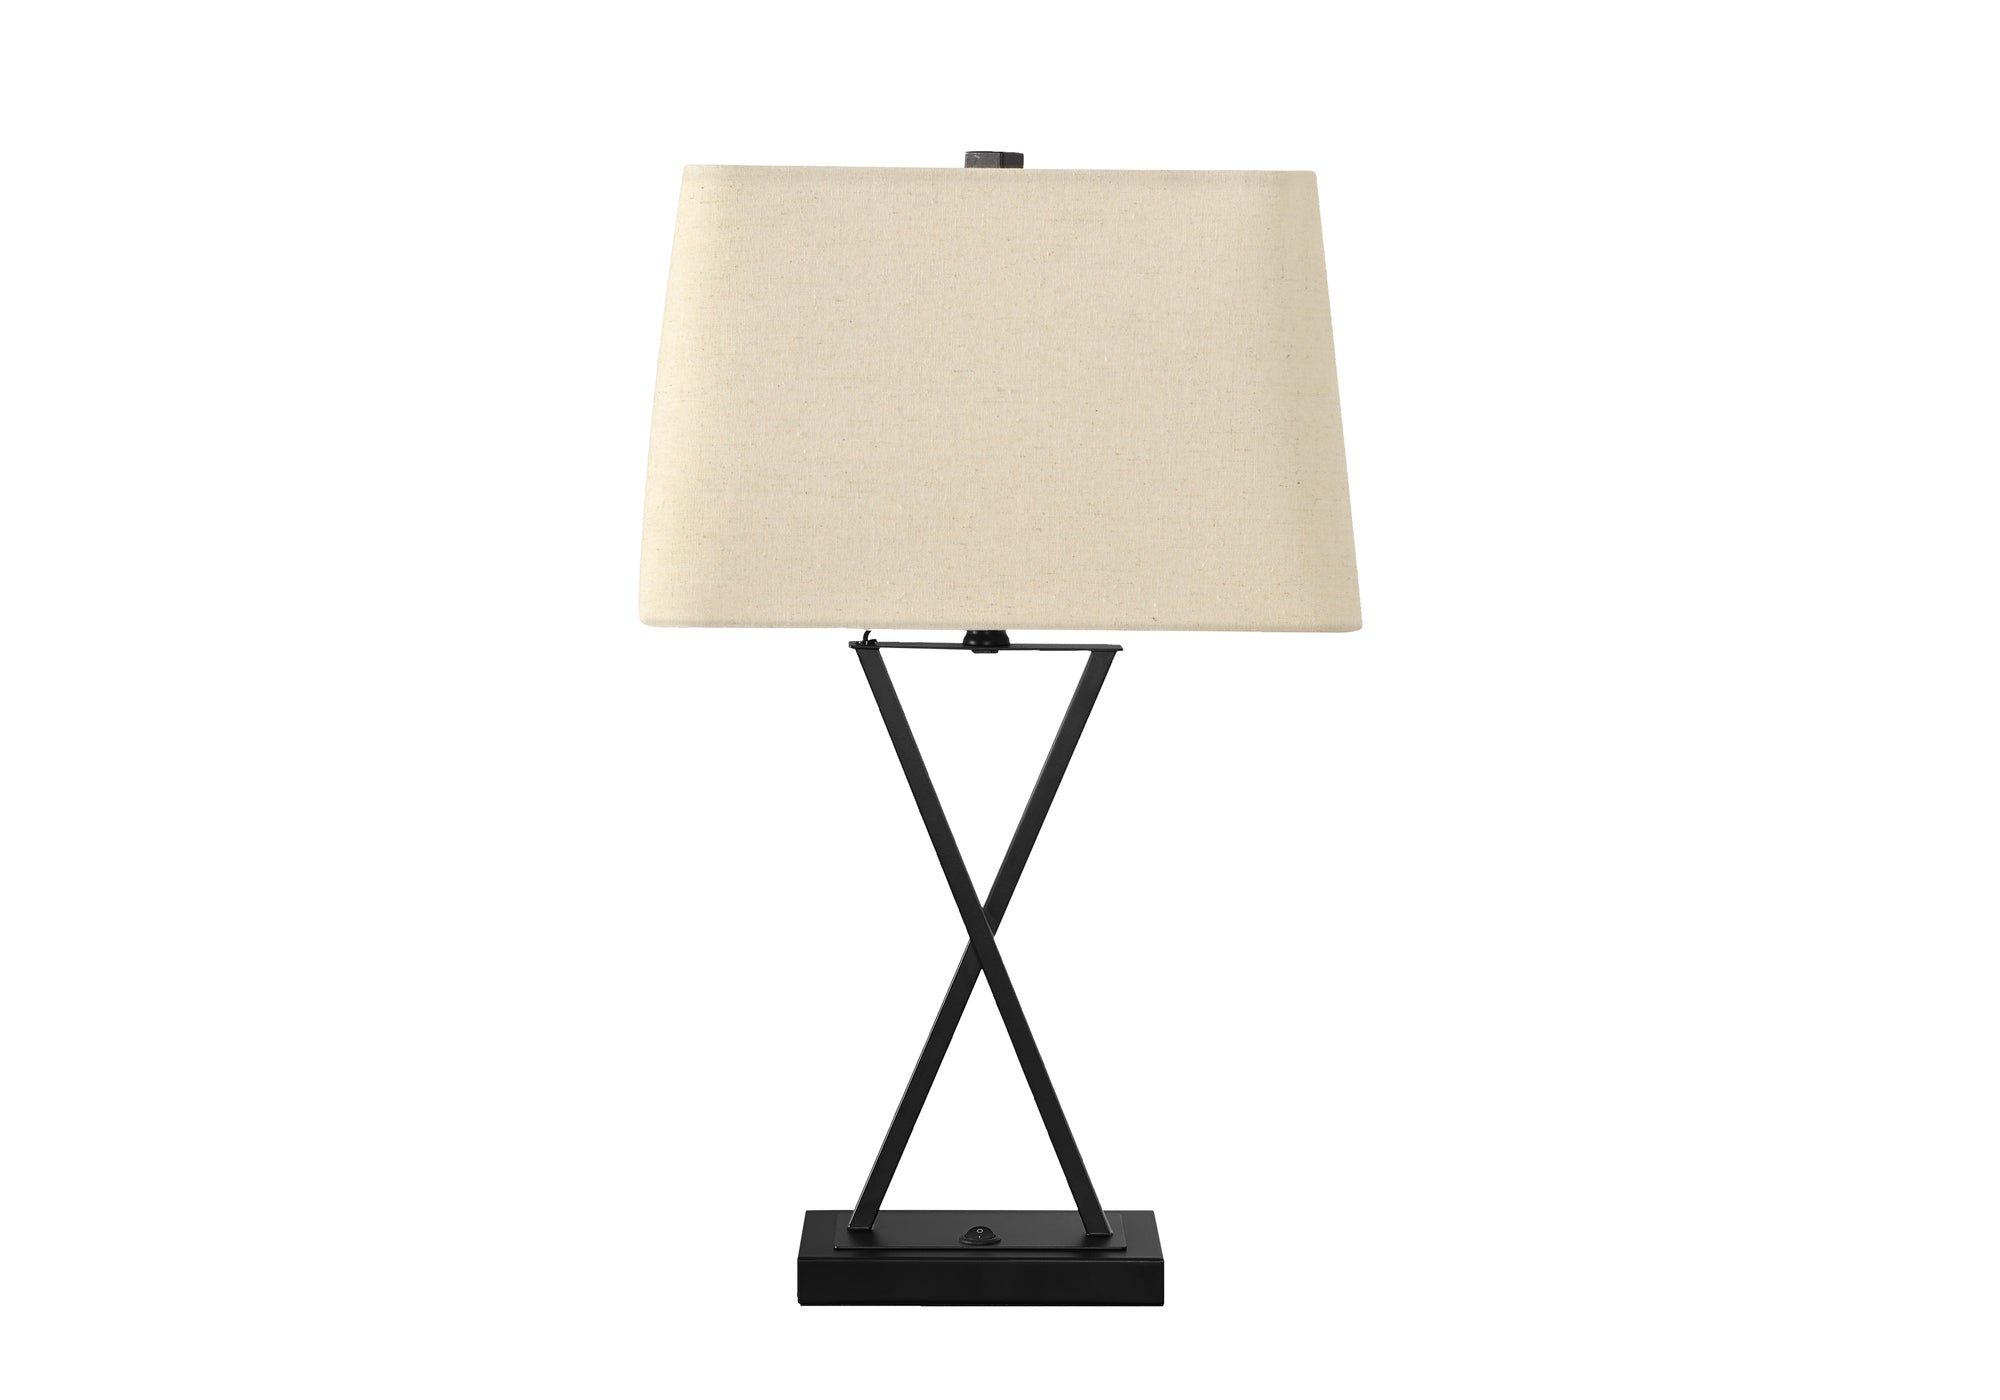 MN-199638    Lighting, 25"H, Table Lamp, Usb Port Included, Black Metal, Beige Shade, Transitional